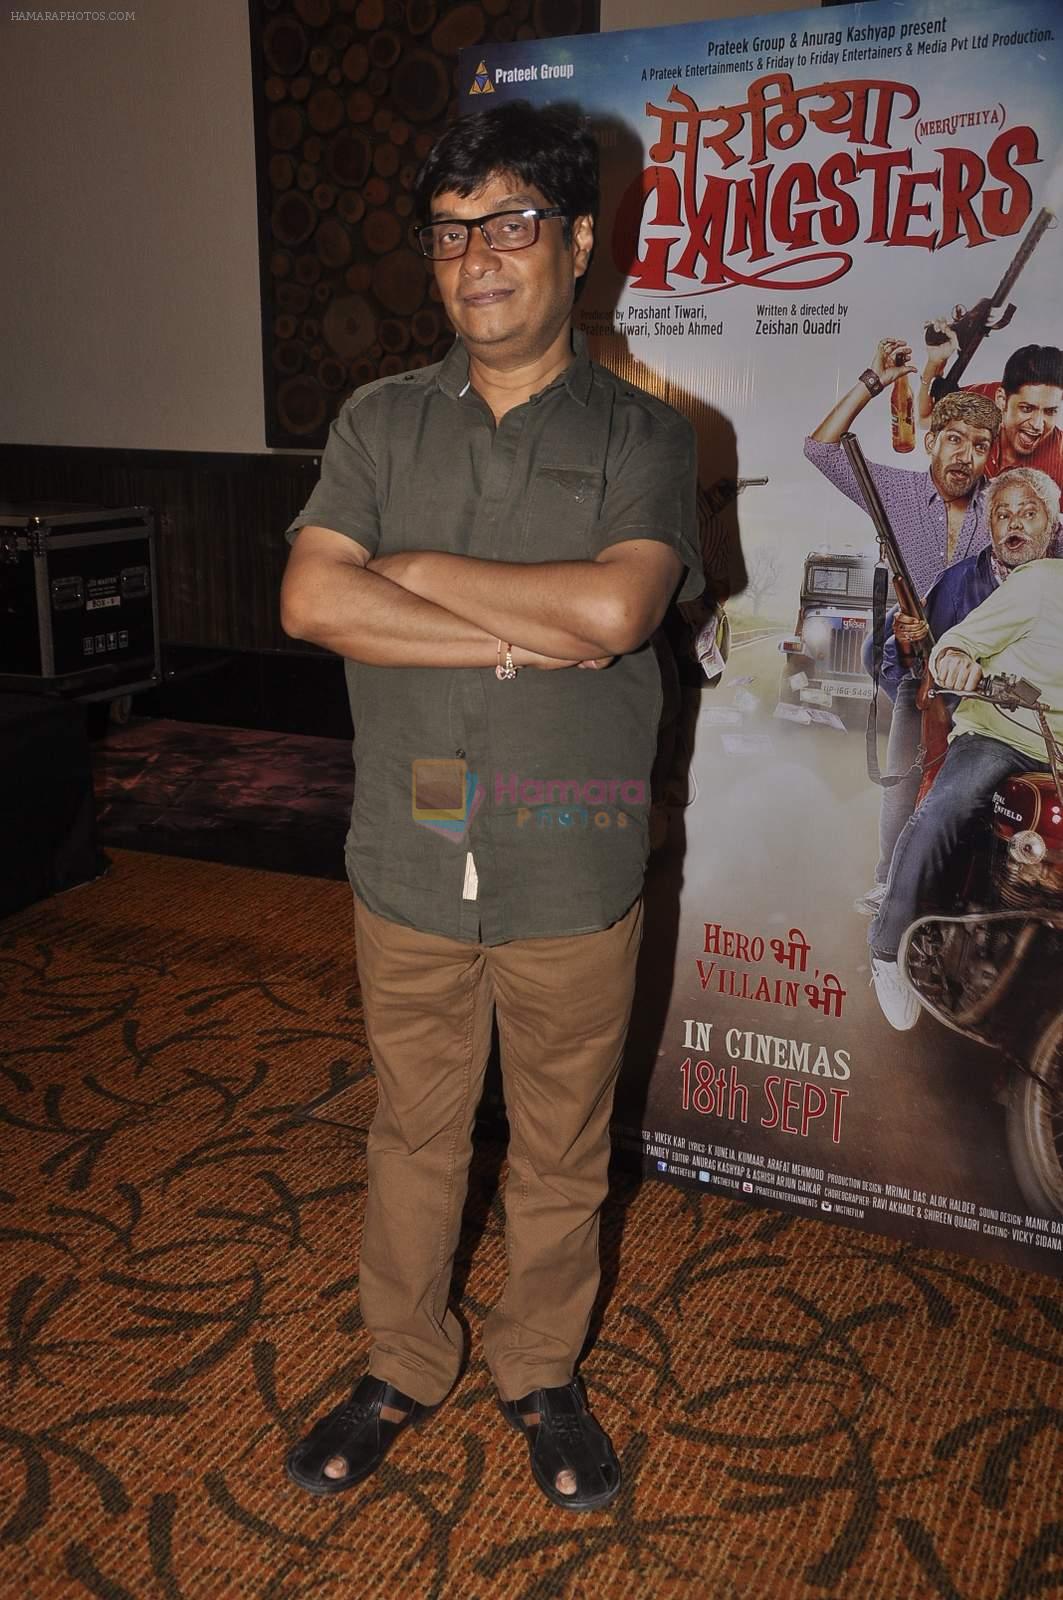 at Merathiya Gangsters music launch in Novotel on 7th Sept 2015